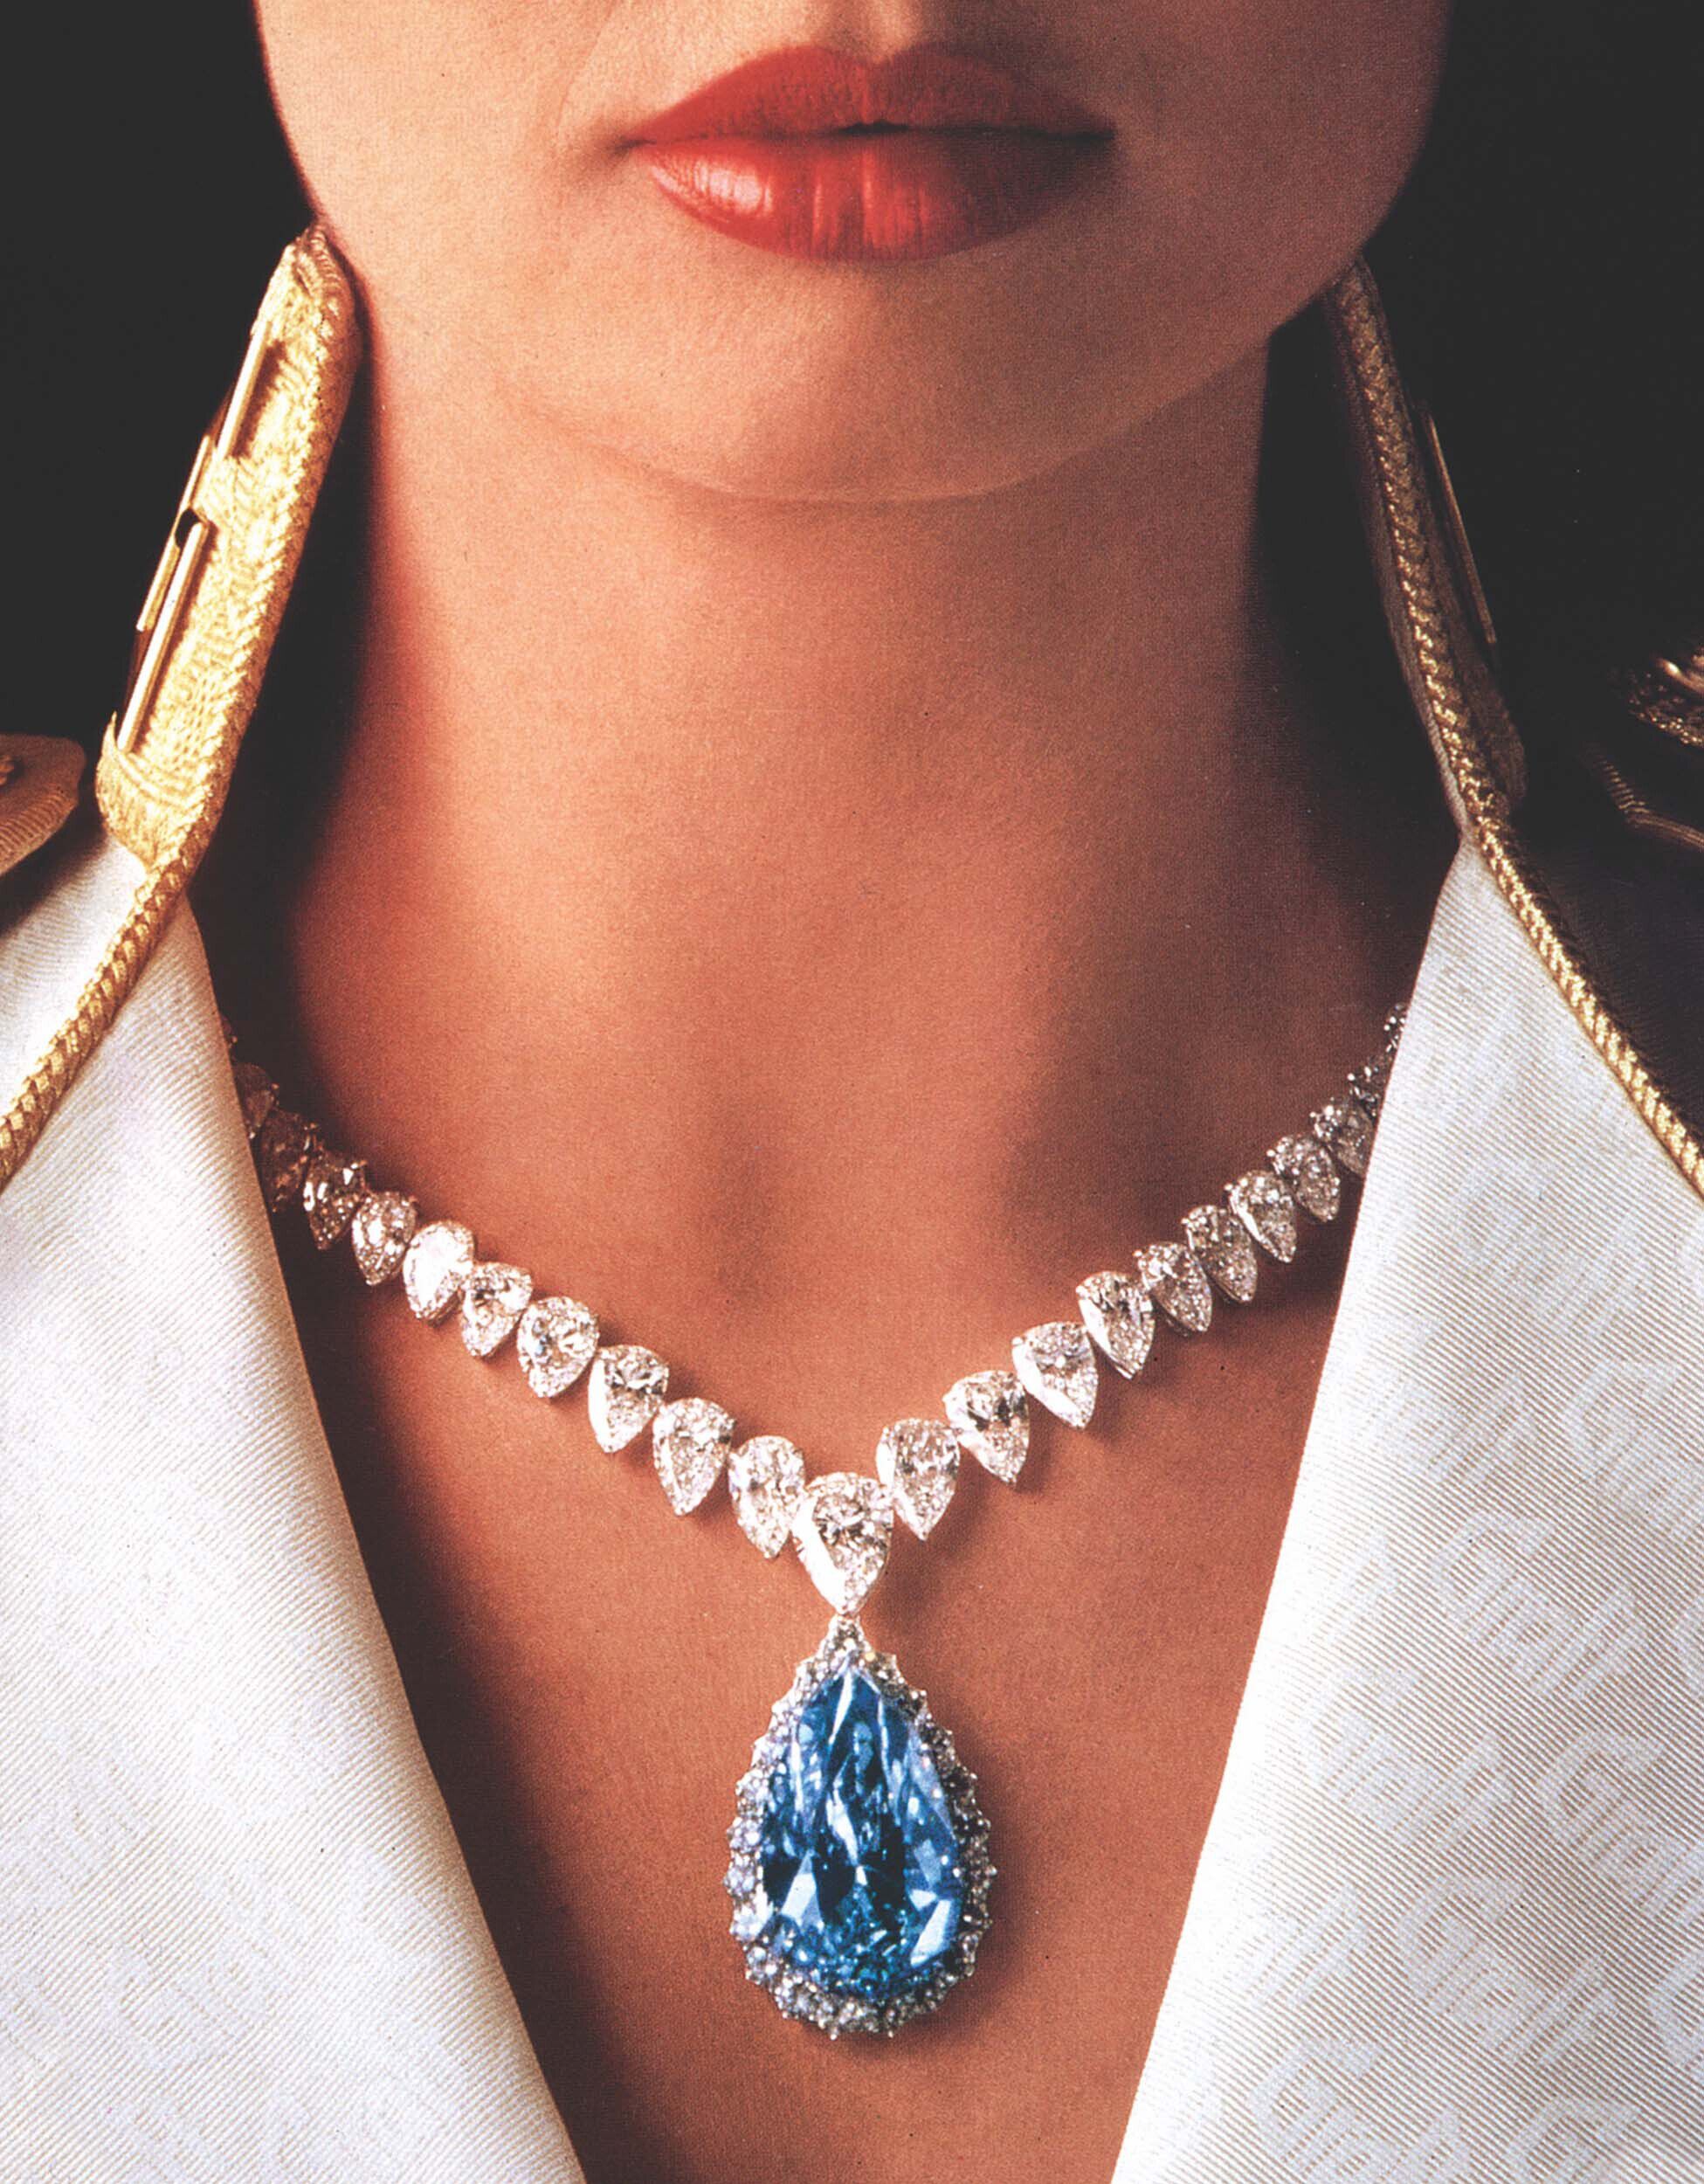 Close up of a model wearing a Graff blue and white diamond high jewellery necklace